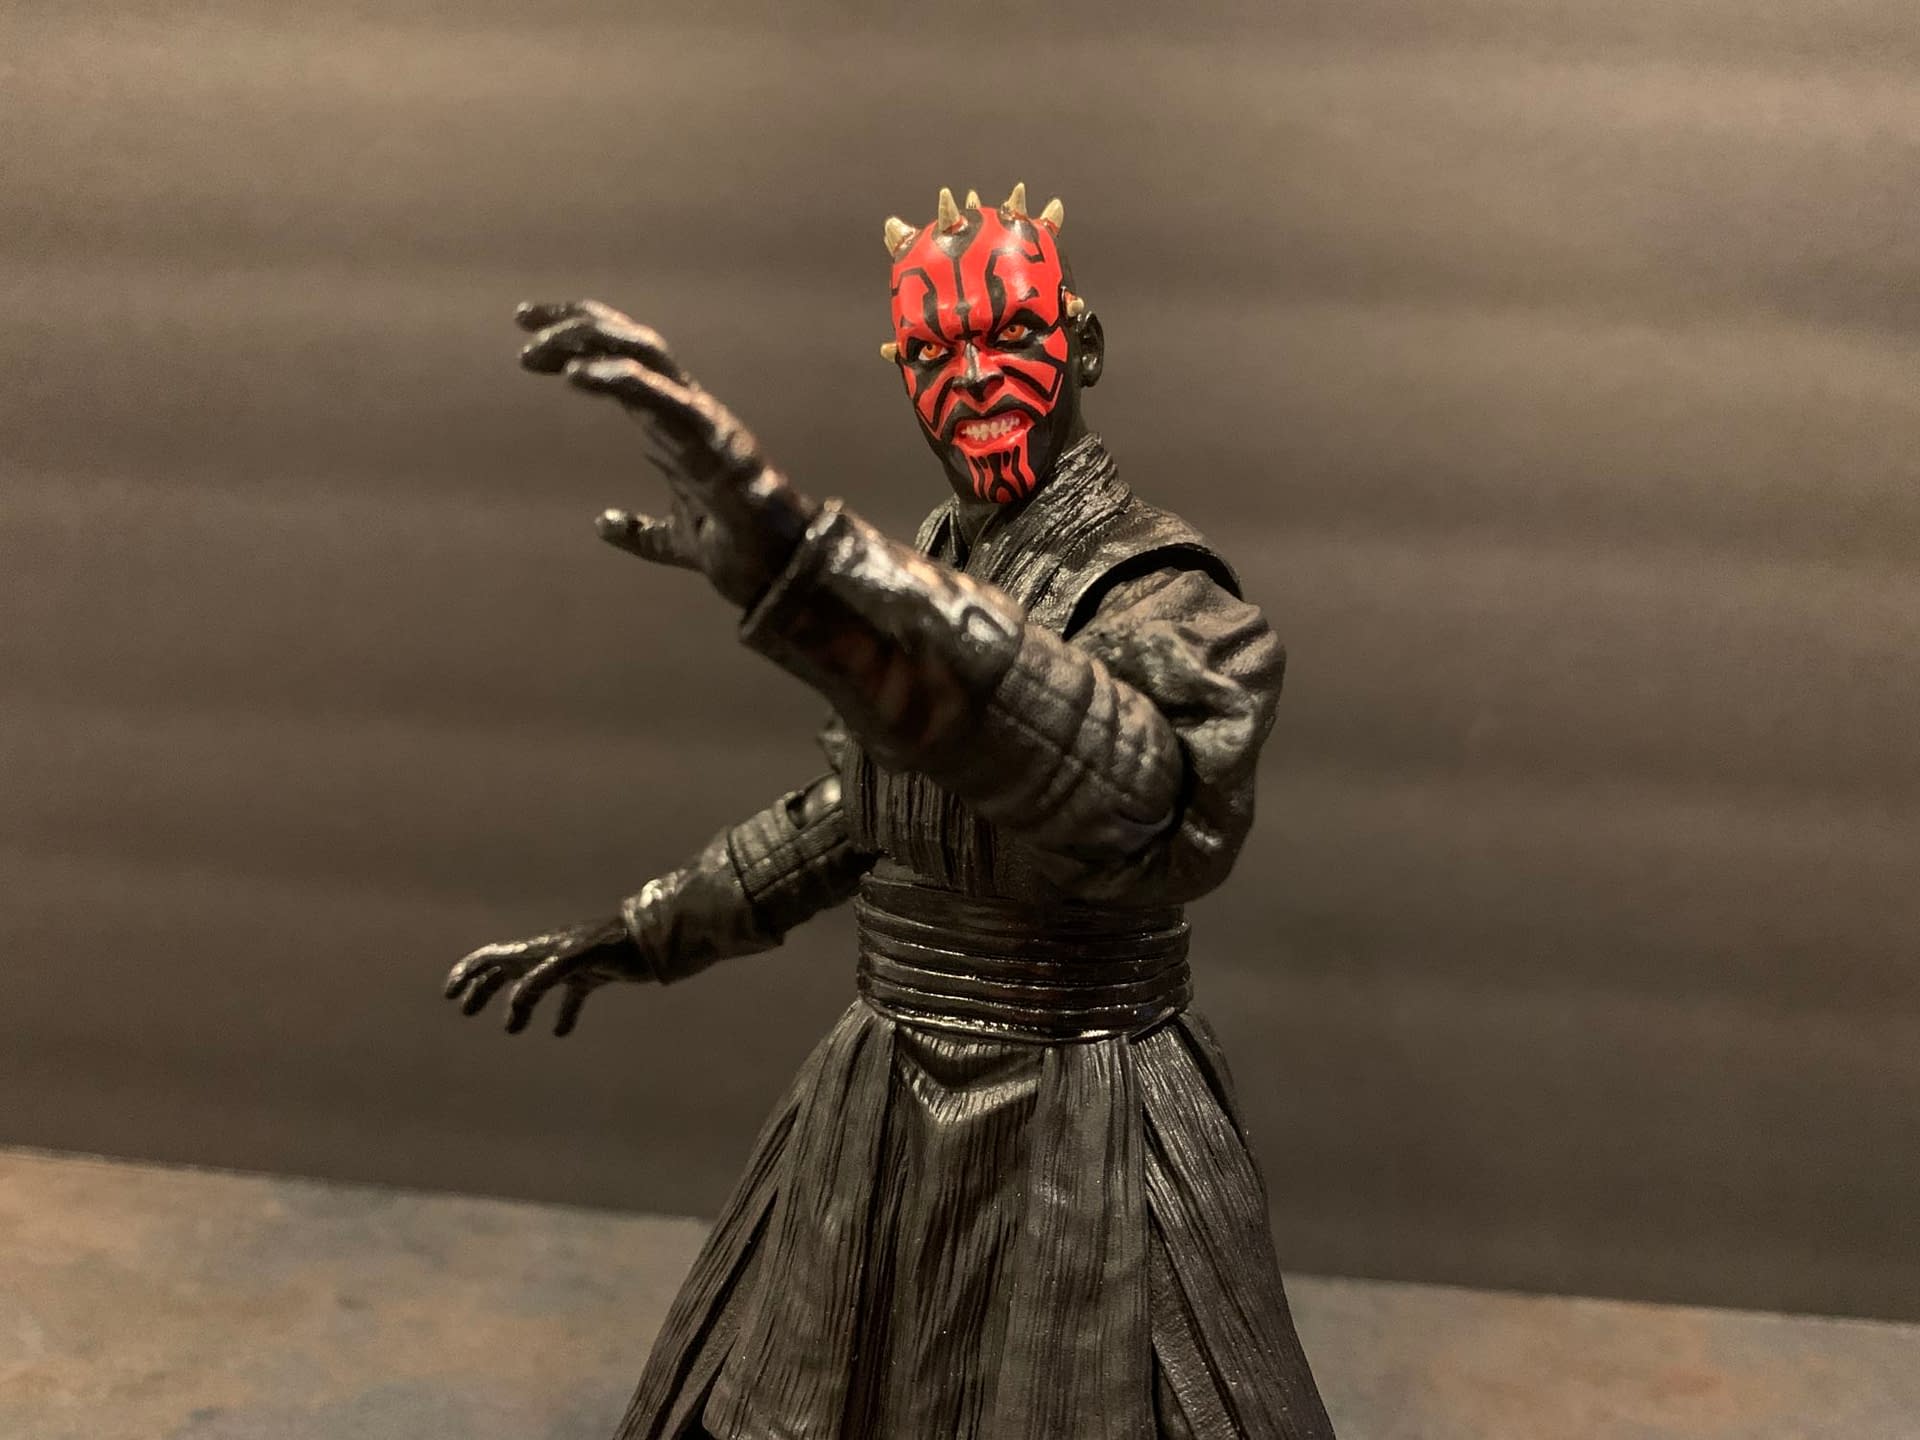 Let's Take A Look At Diamond Select's New Star Wars Darth Maul Figure